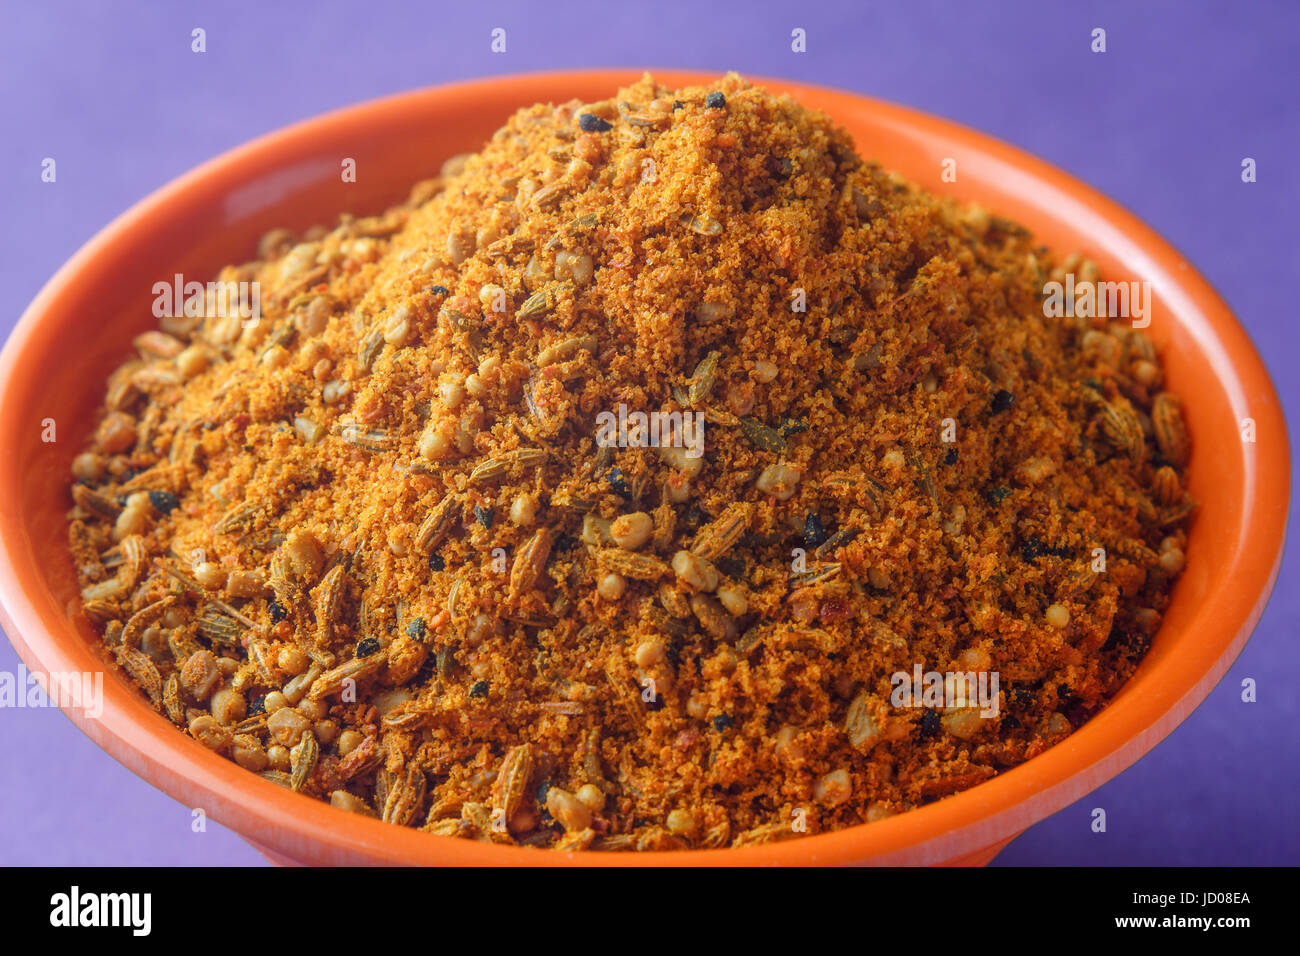 close up of indian achar masala (Powder) in a bowl Stock Photo